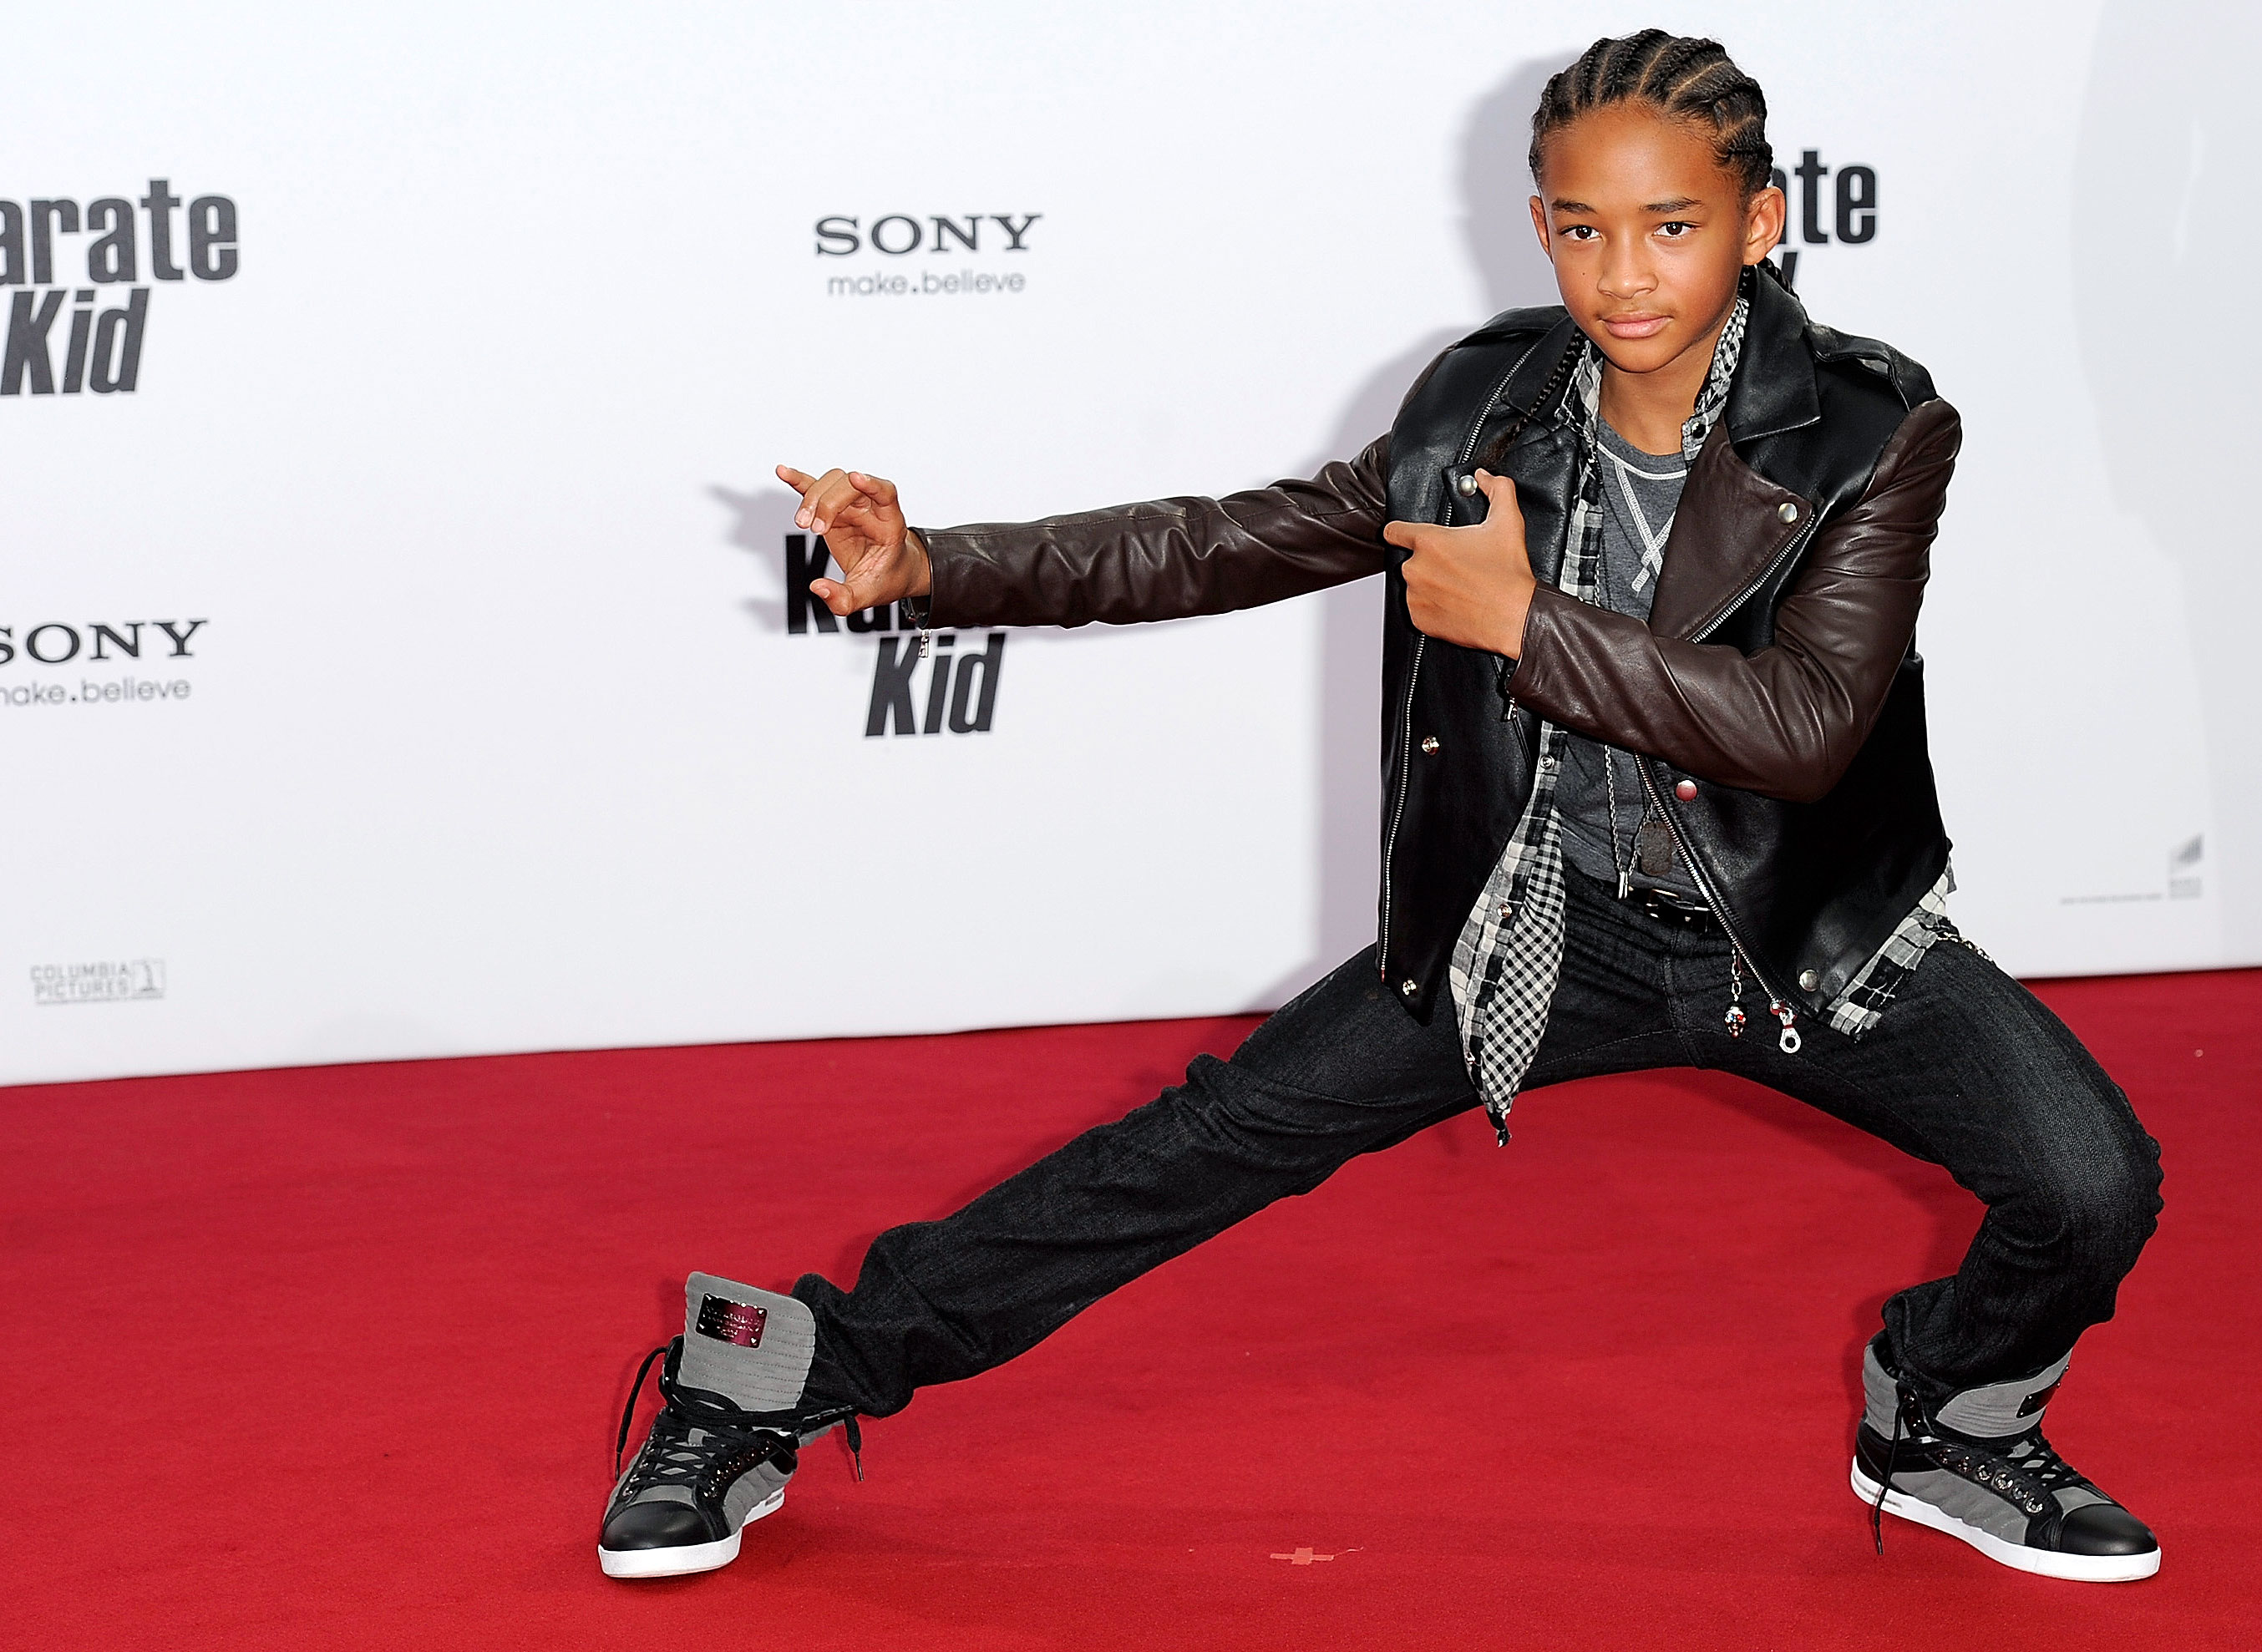 Fashion: Mr Jaden Smith Is Here To Take You On A Trip, The Journal